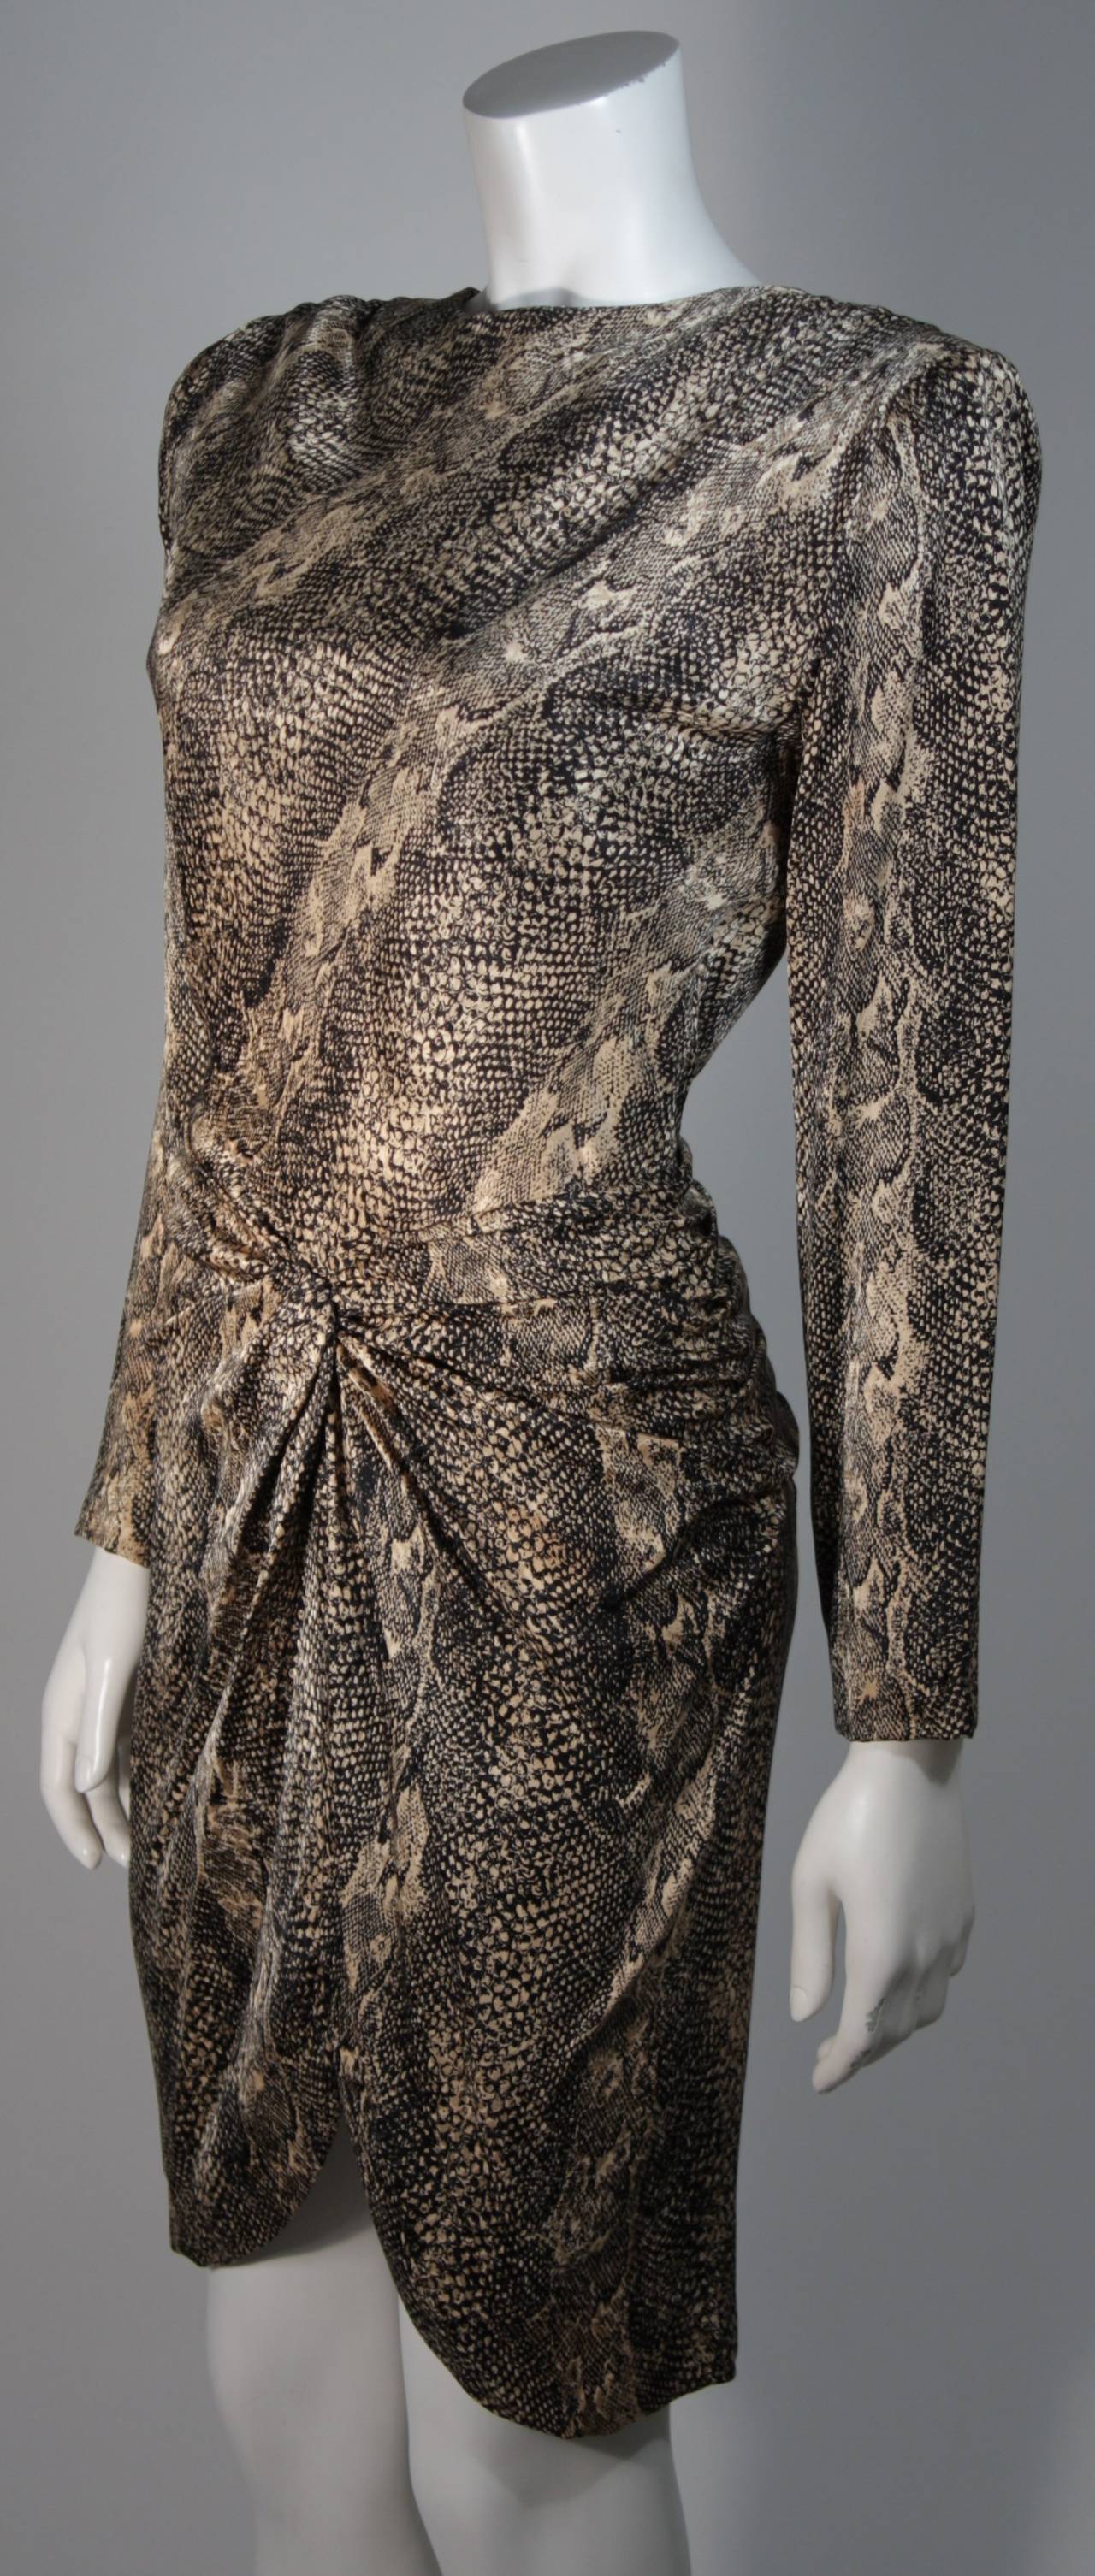 Women's Vicky Tiel Silk Snakeskin Cocktail Dress with Draping Size Small